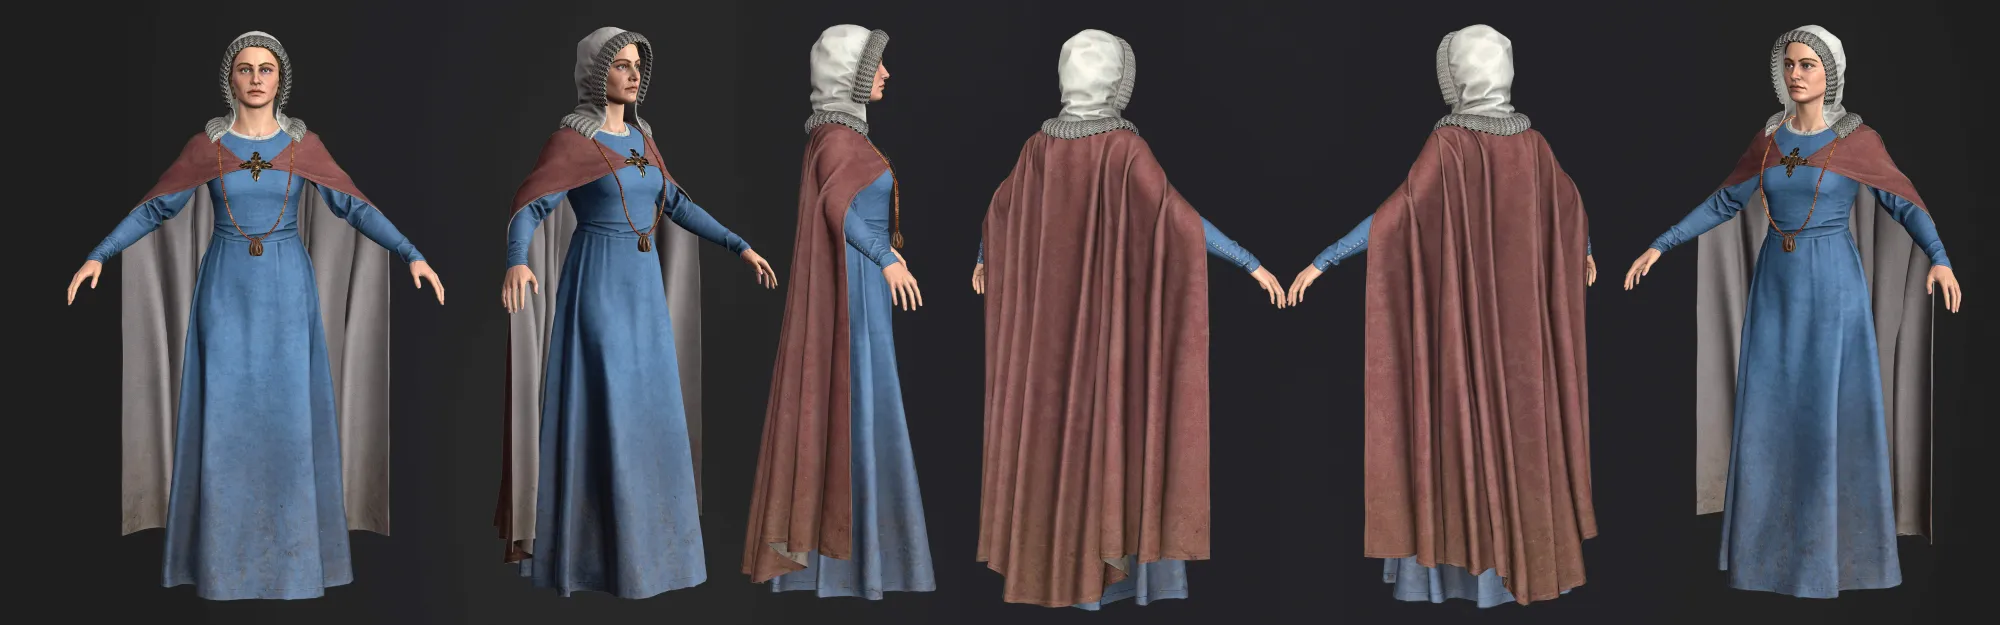 Lady of the Manor's character model